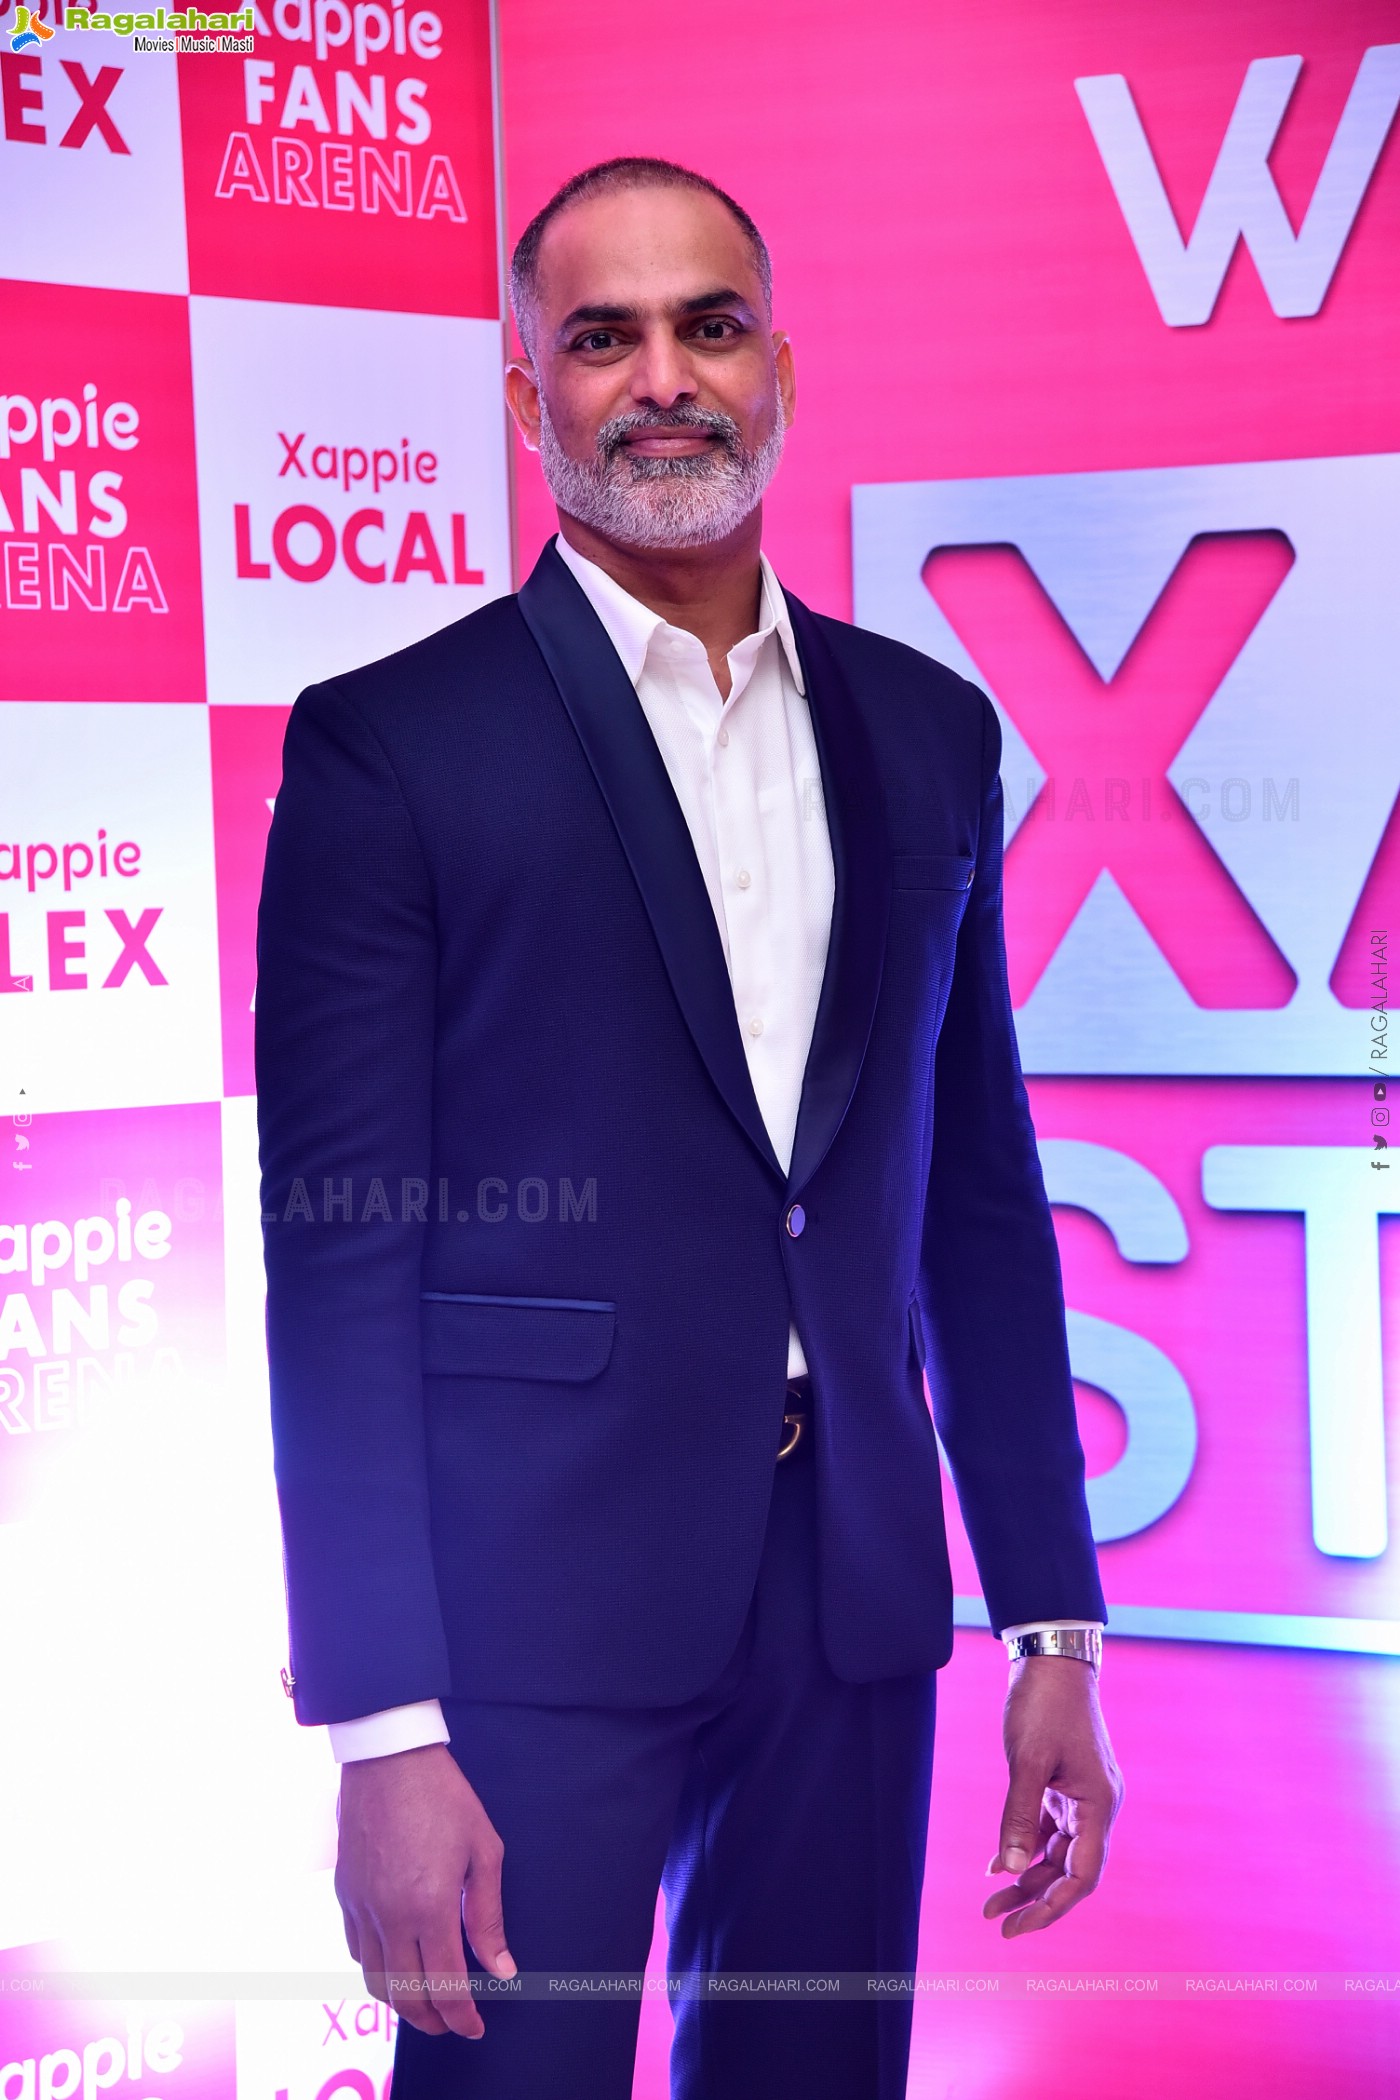 Xappie Studios Production House Launch And and Four Upcoming Movie Projects Announcement